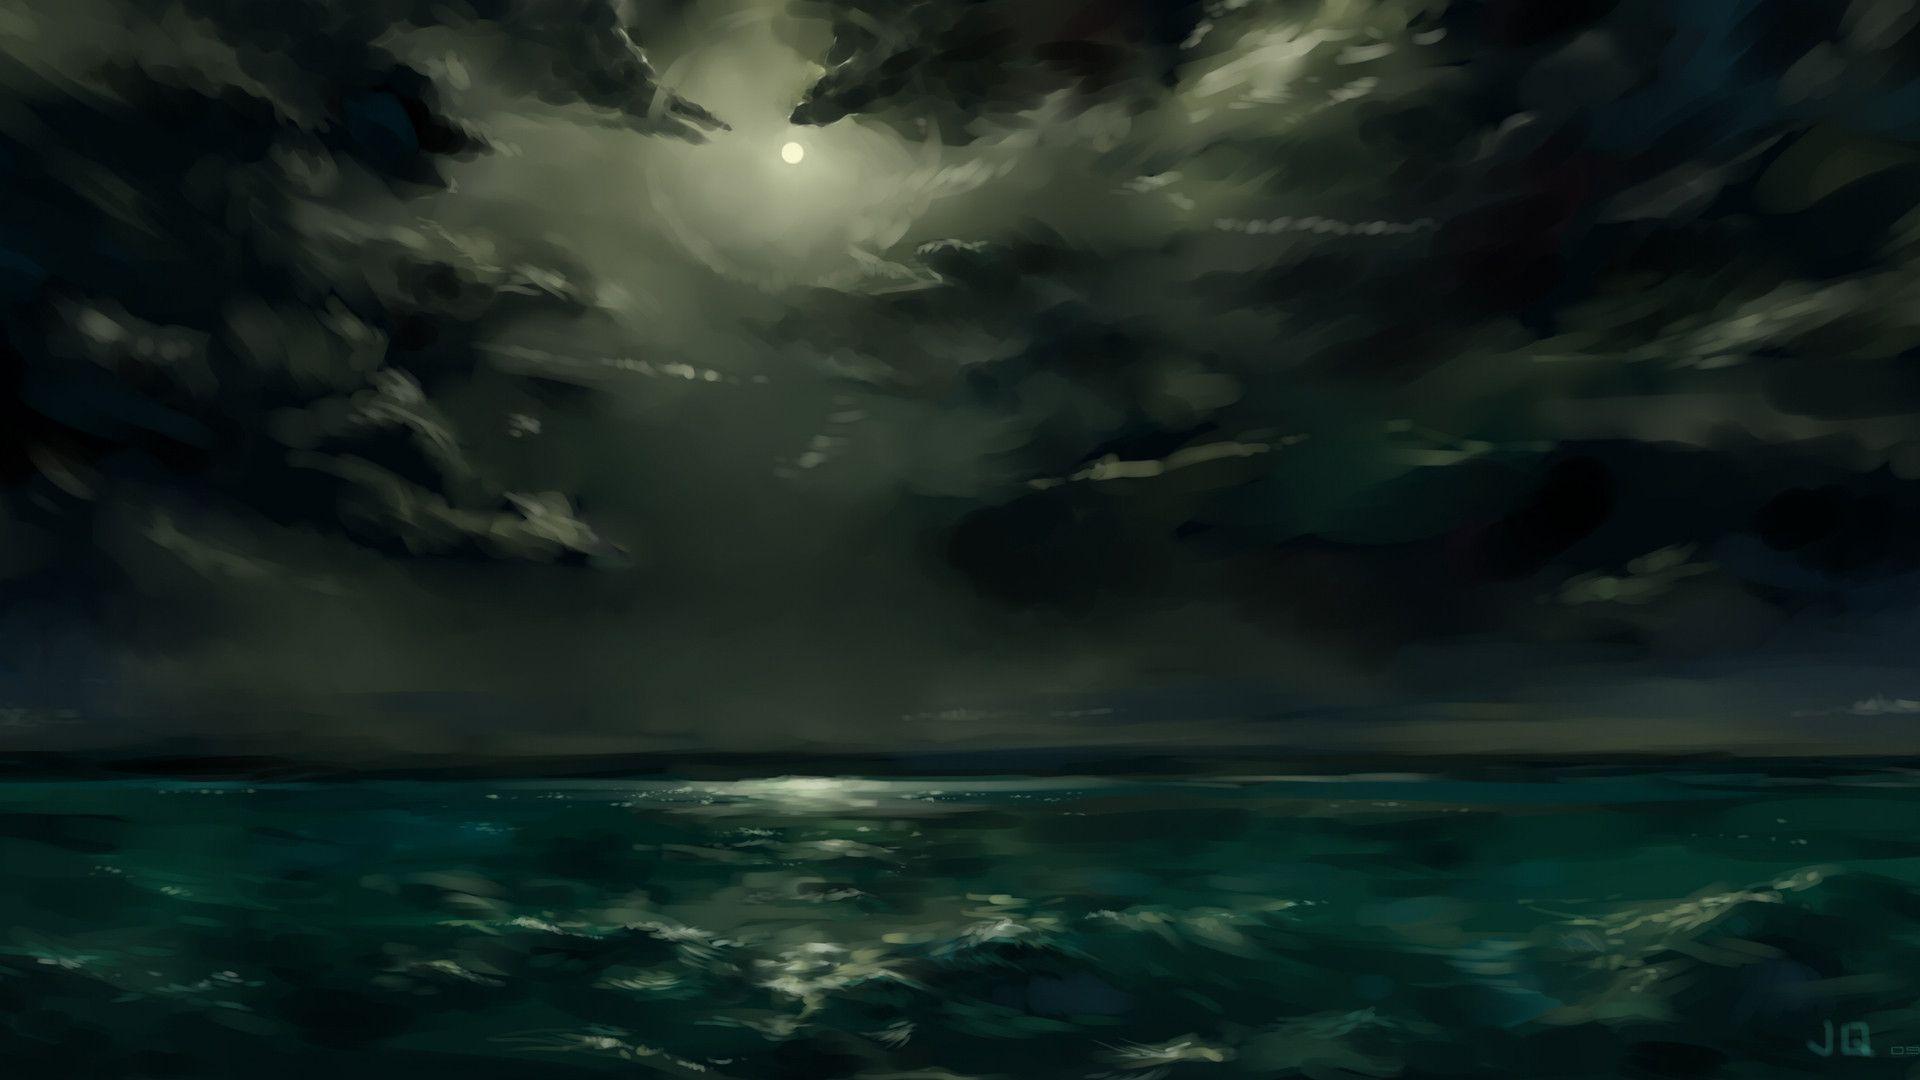 Nothing much here, just a dark sea